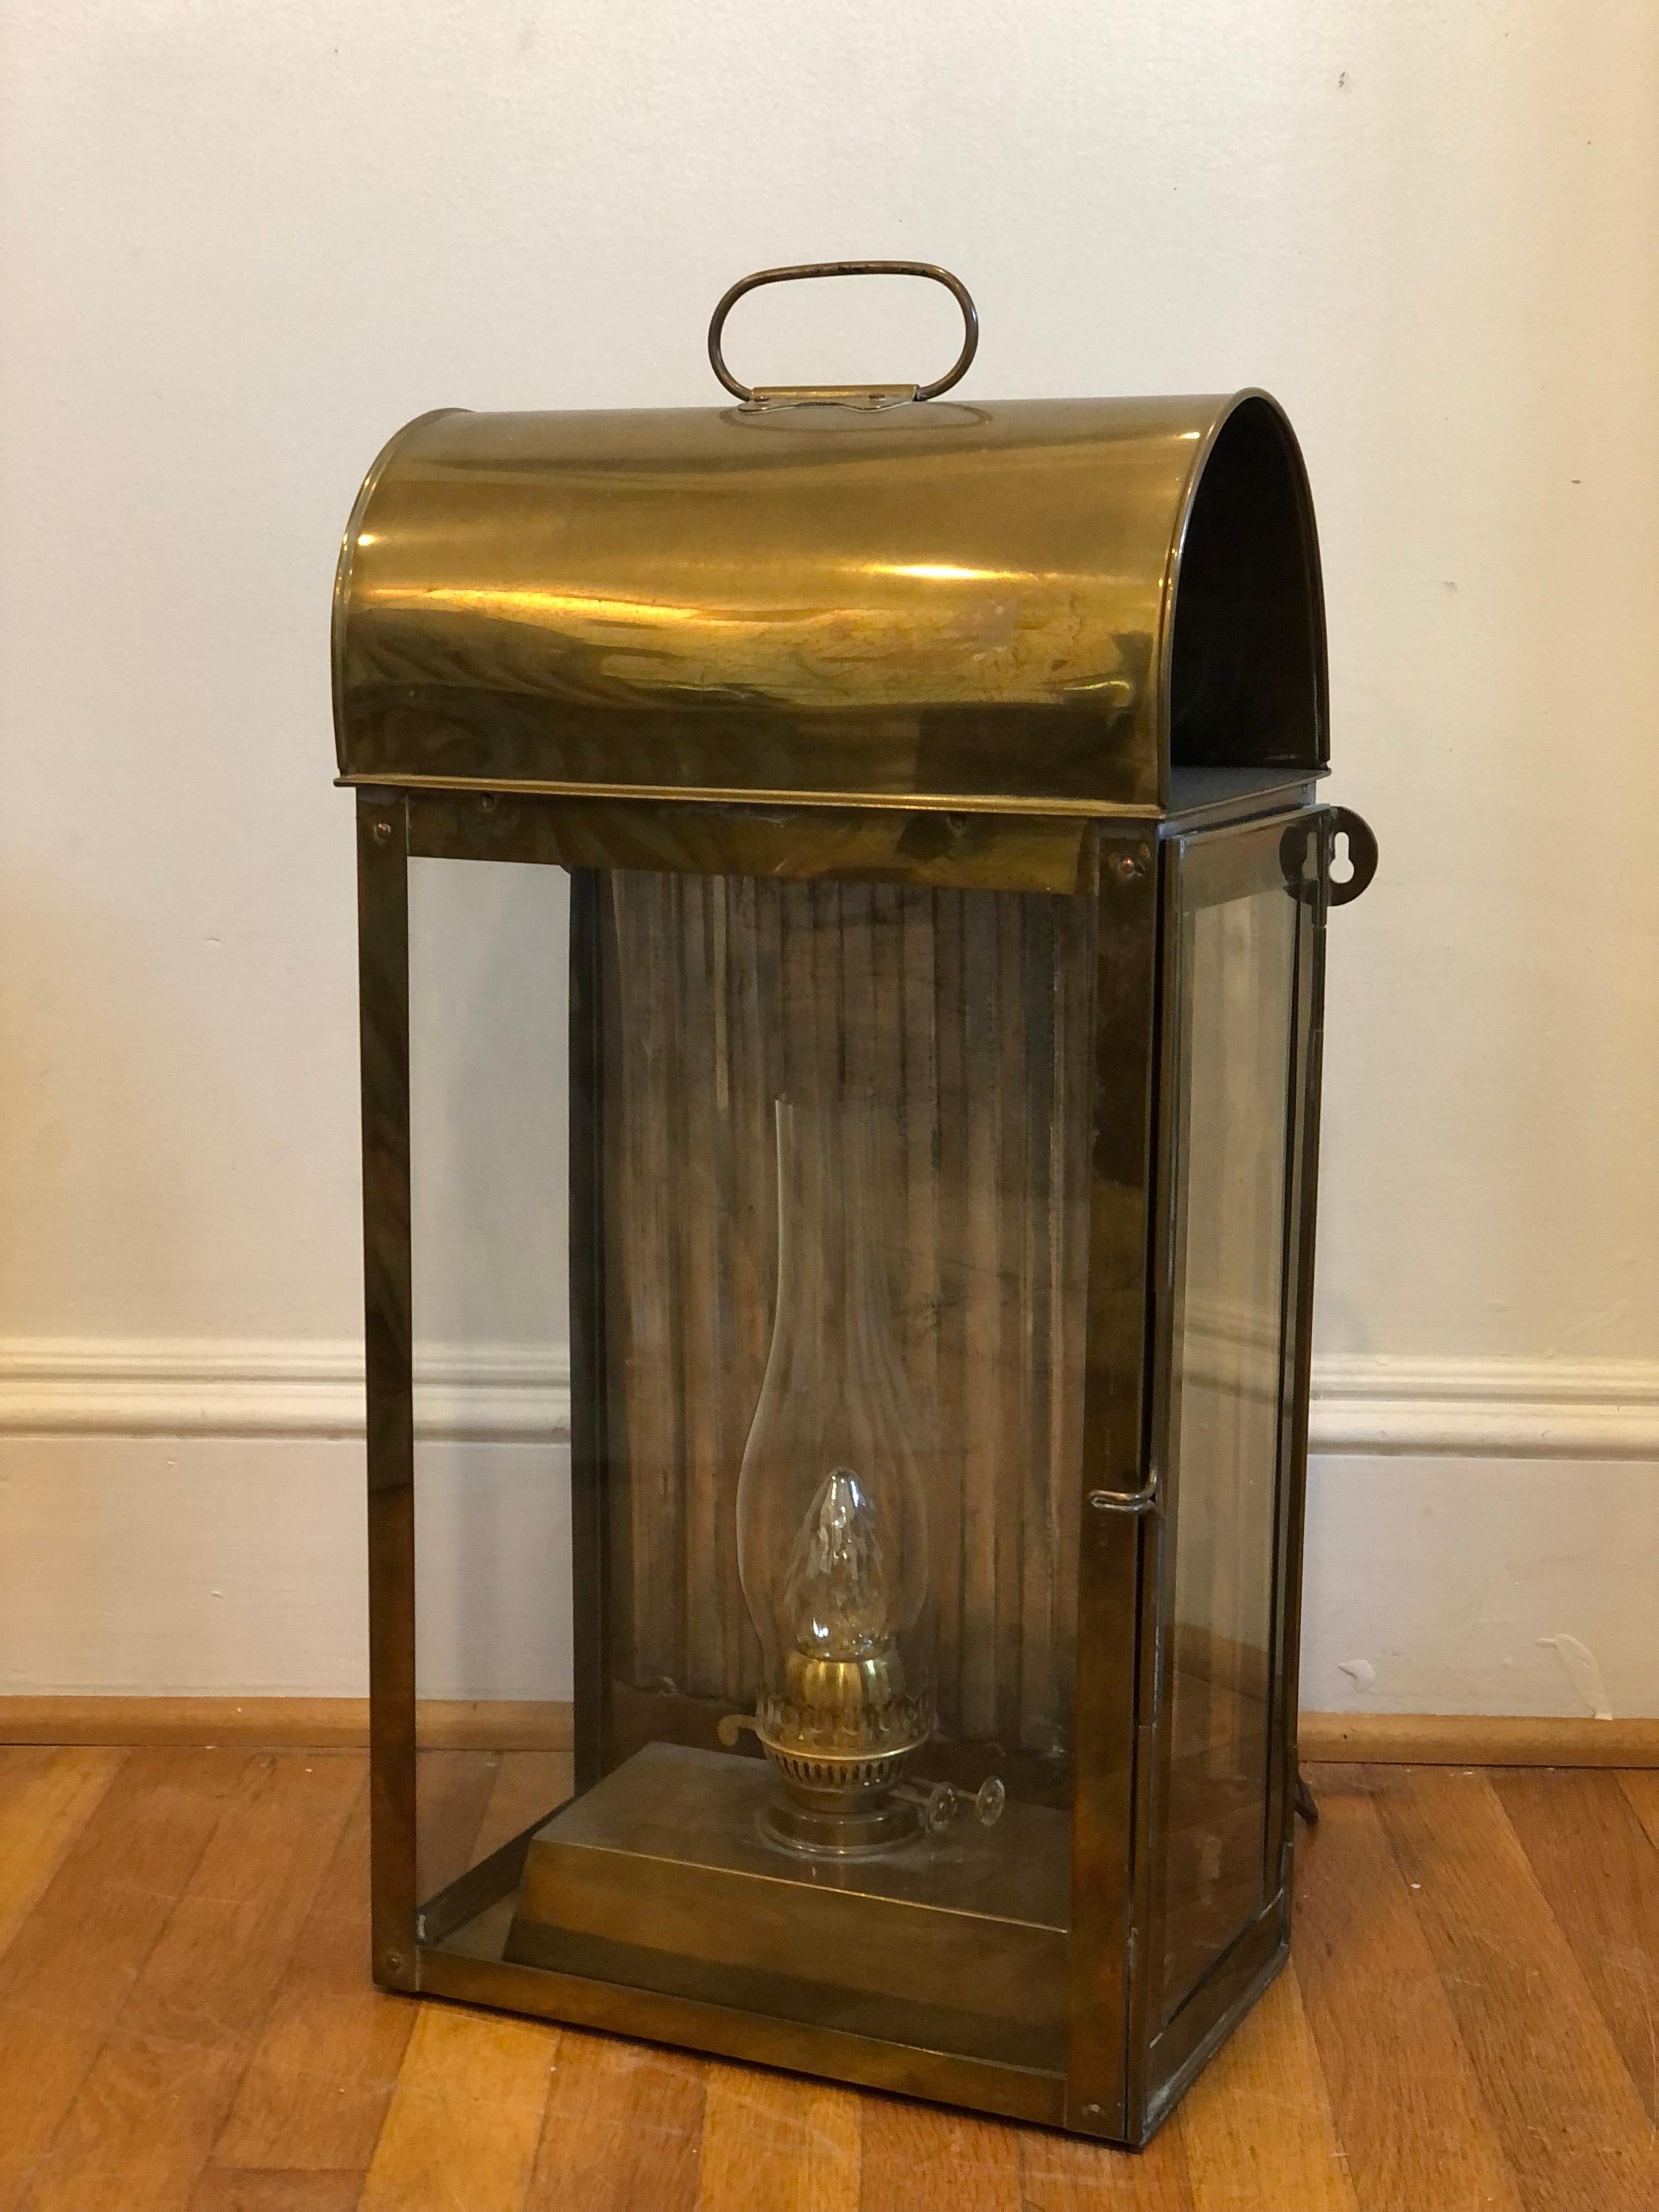 Massive sized Davey and Company style ship kerosine lamp (has been wired for electric).
Stamped Made In England.
This lantern features a Classic rectangular body with an arched top and a brass handles. The lantern has three beveled glass panels